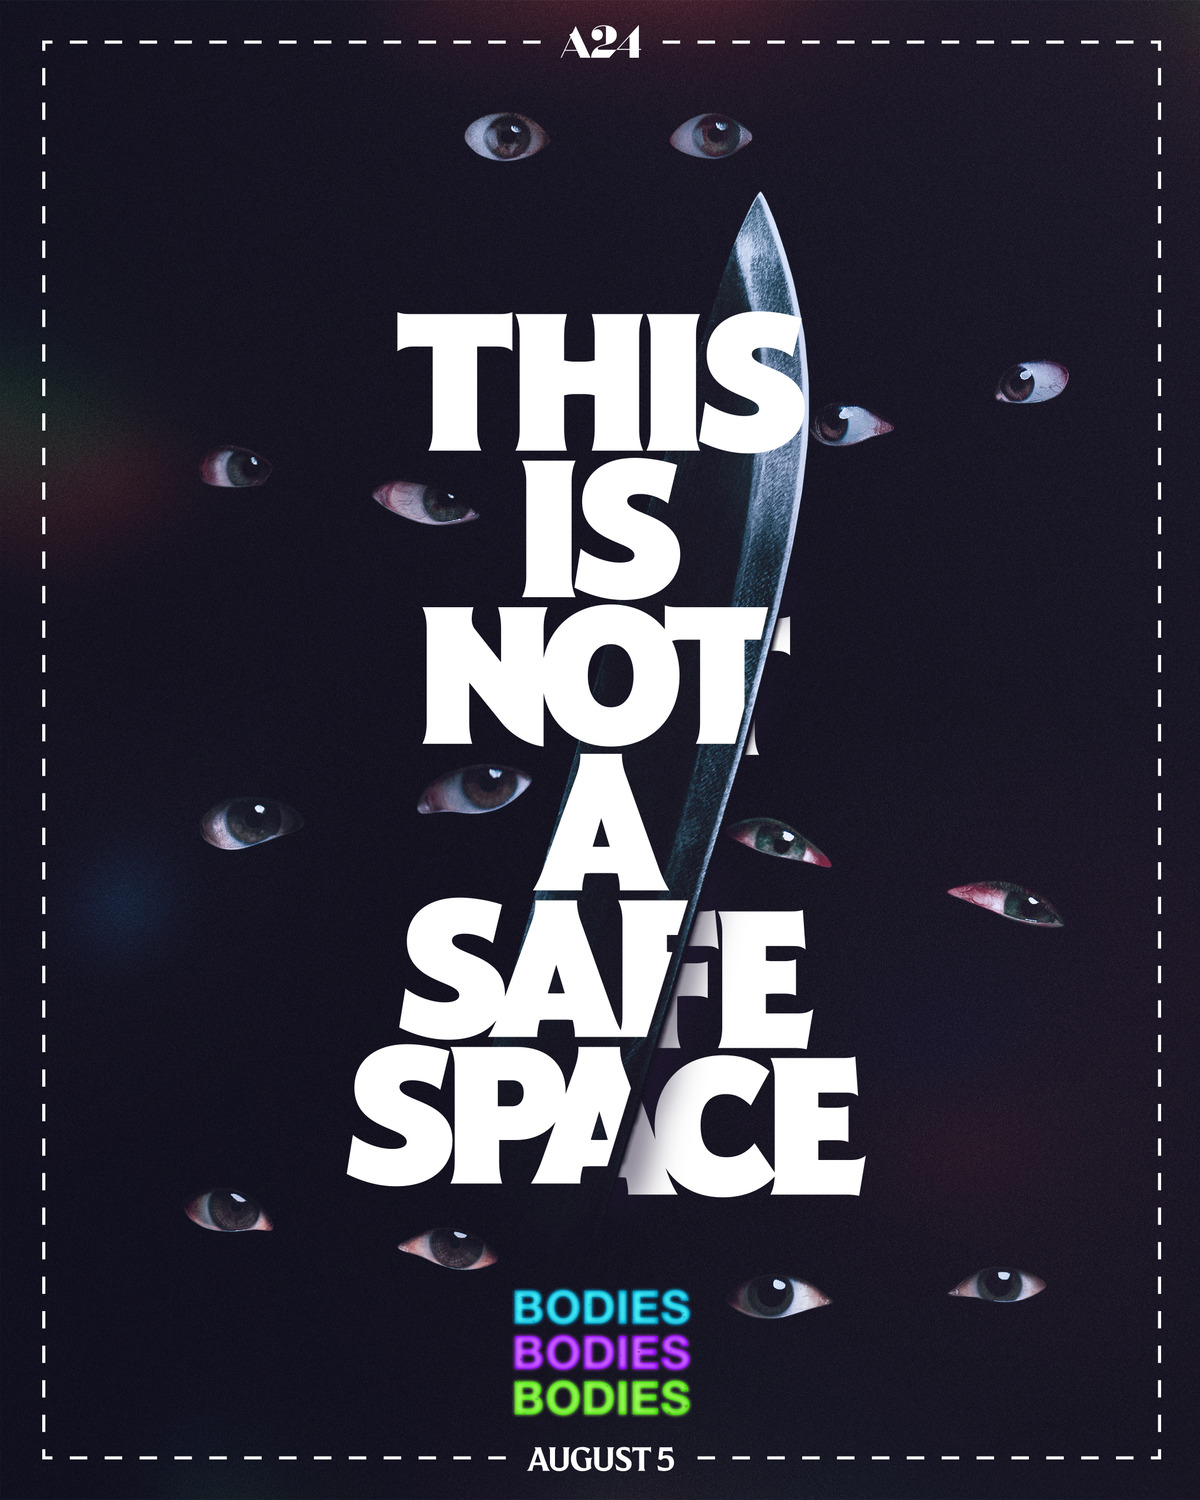 Extra Large Movie Poster Image for Bodies Bodies Bodies (#1 of 2)